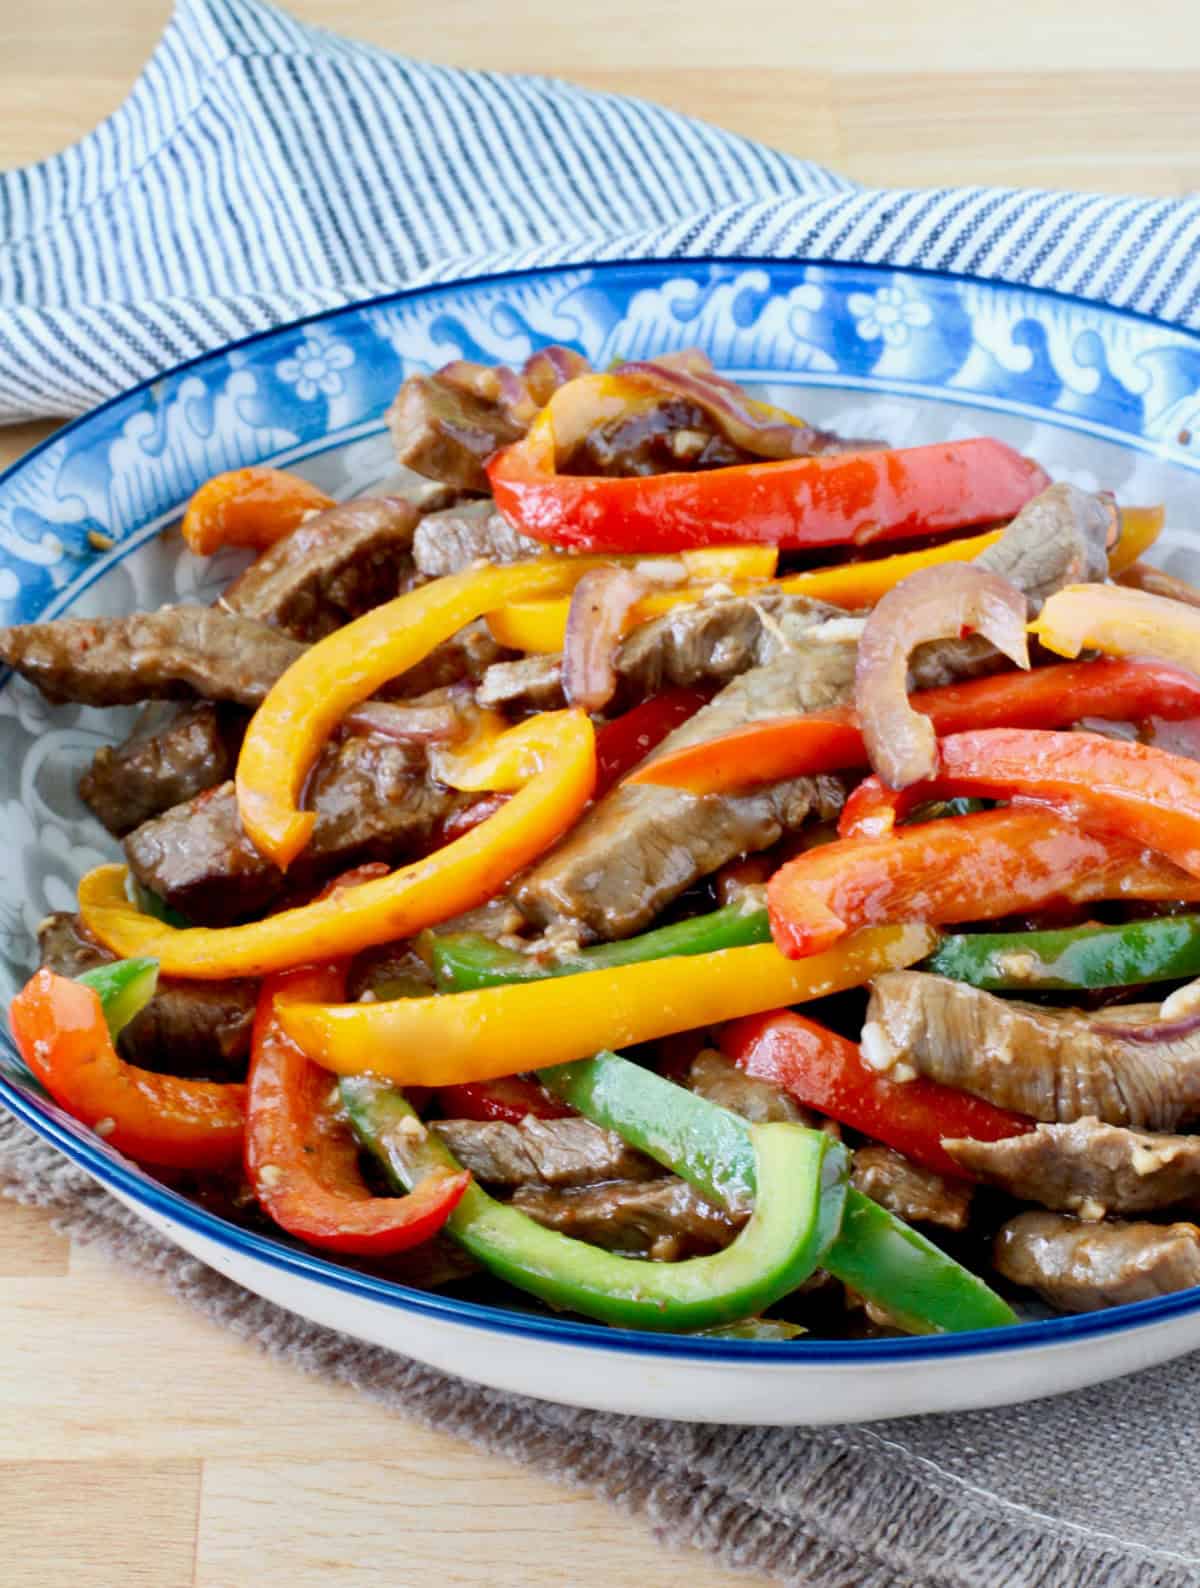 Hot Pepper Beef Stir-Fry in a blue rimmed Asian style bowl.